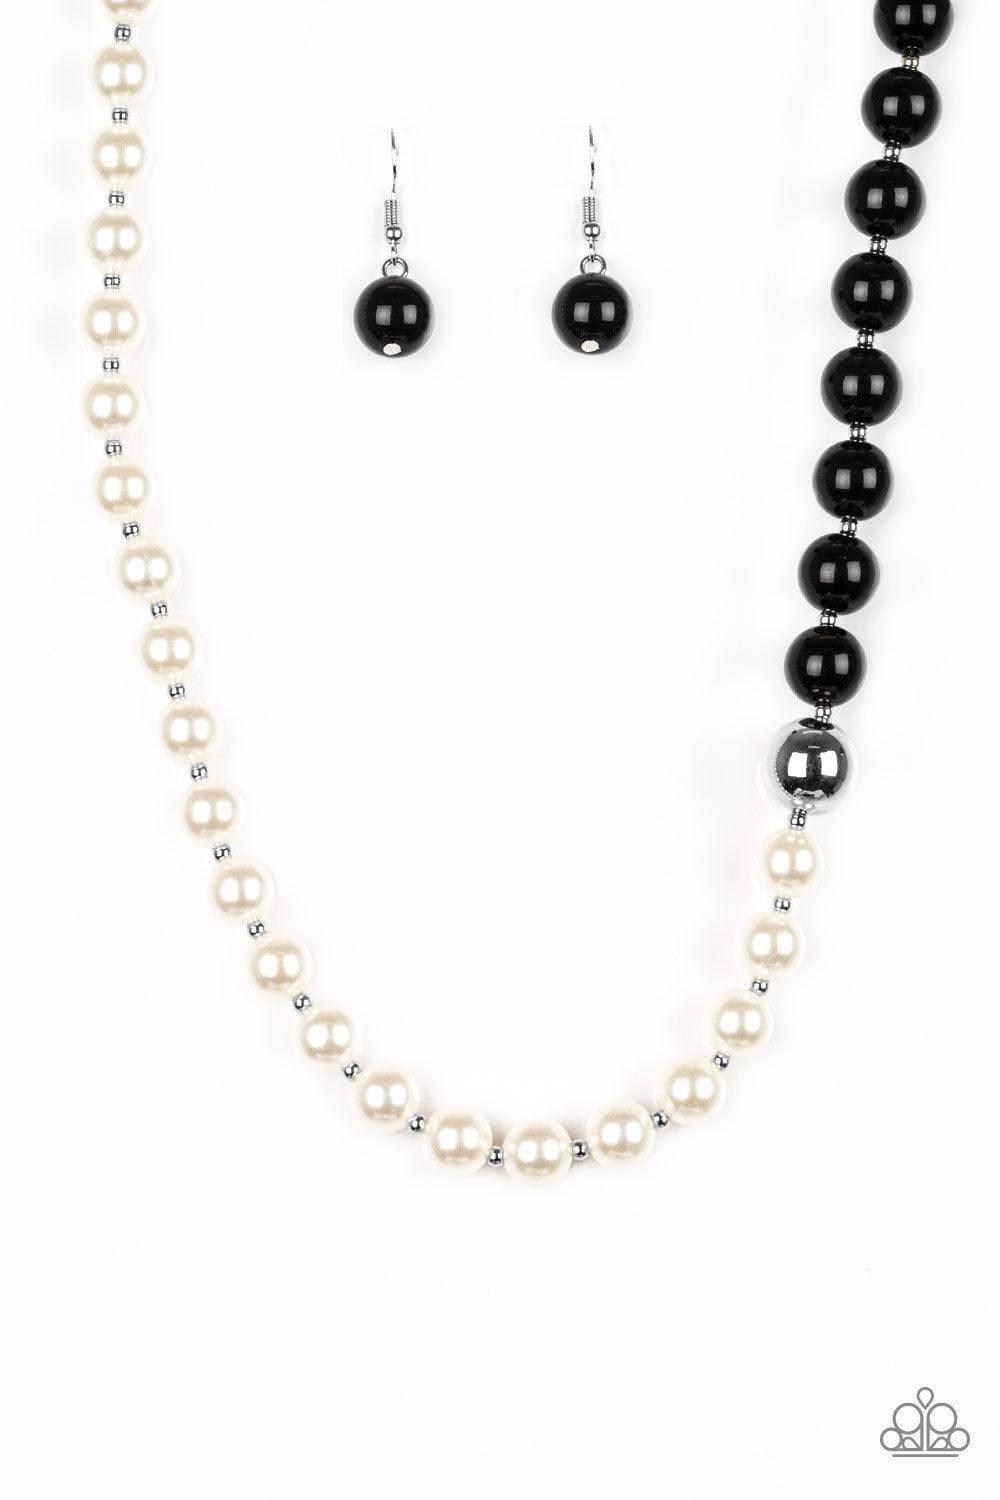 Paparazzi Accessories - Paparazzi Jewelry 5th Avenue A-lister - Black Necklace - Bling by JessieK